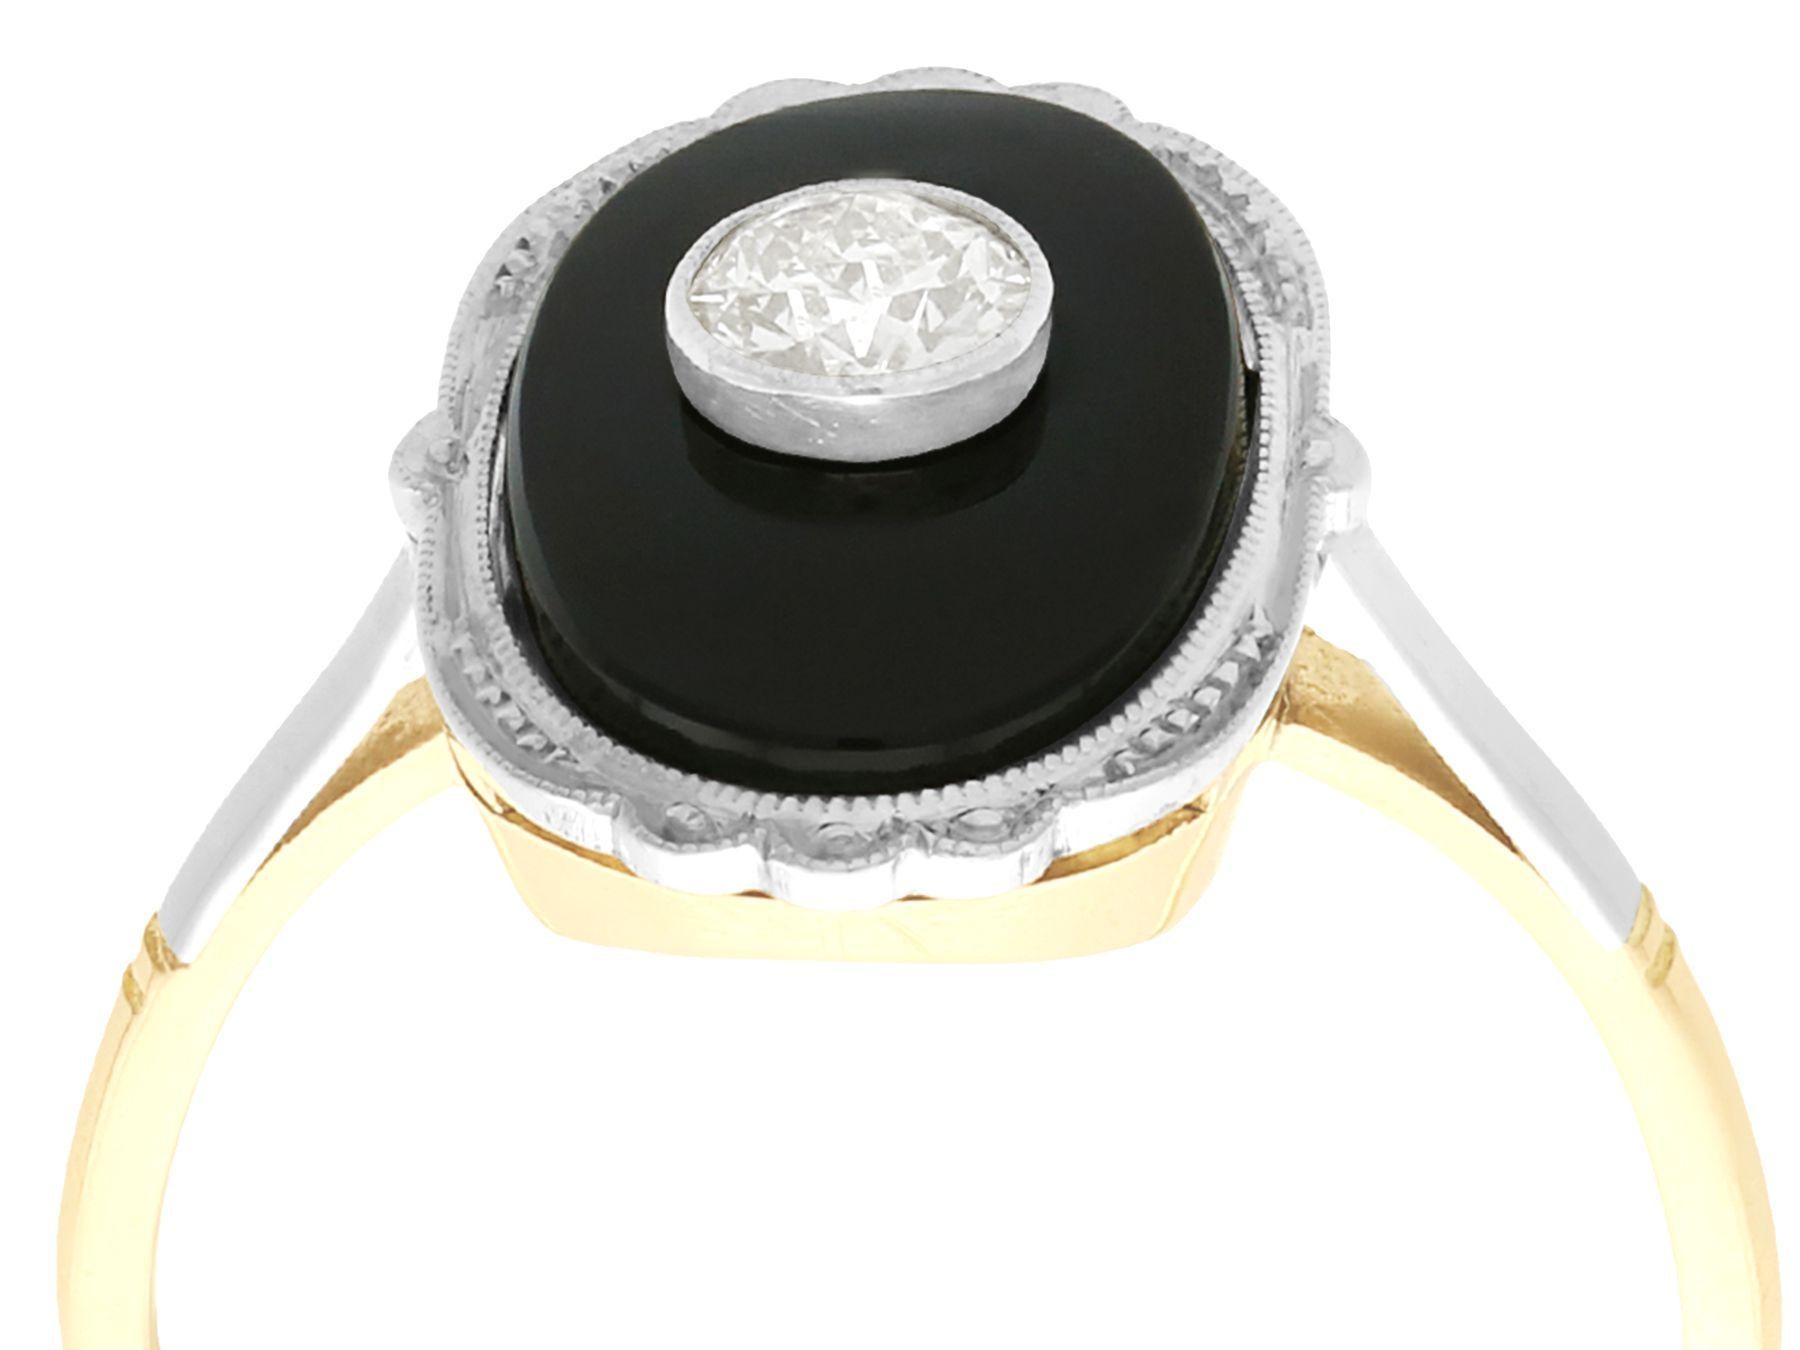 A fine and impressive 0.38 carat diamond and black onyx, 12k yellow gold dress ring with a 12k white gold setting; part of our diverse antique jewelry and estate jewelry collections

This fine and impressive diamond and onyx dress ring has been